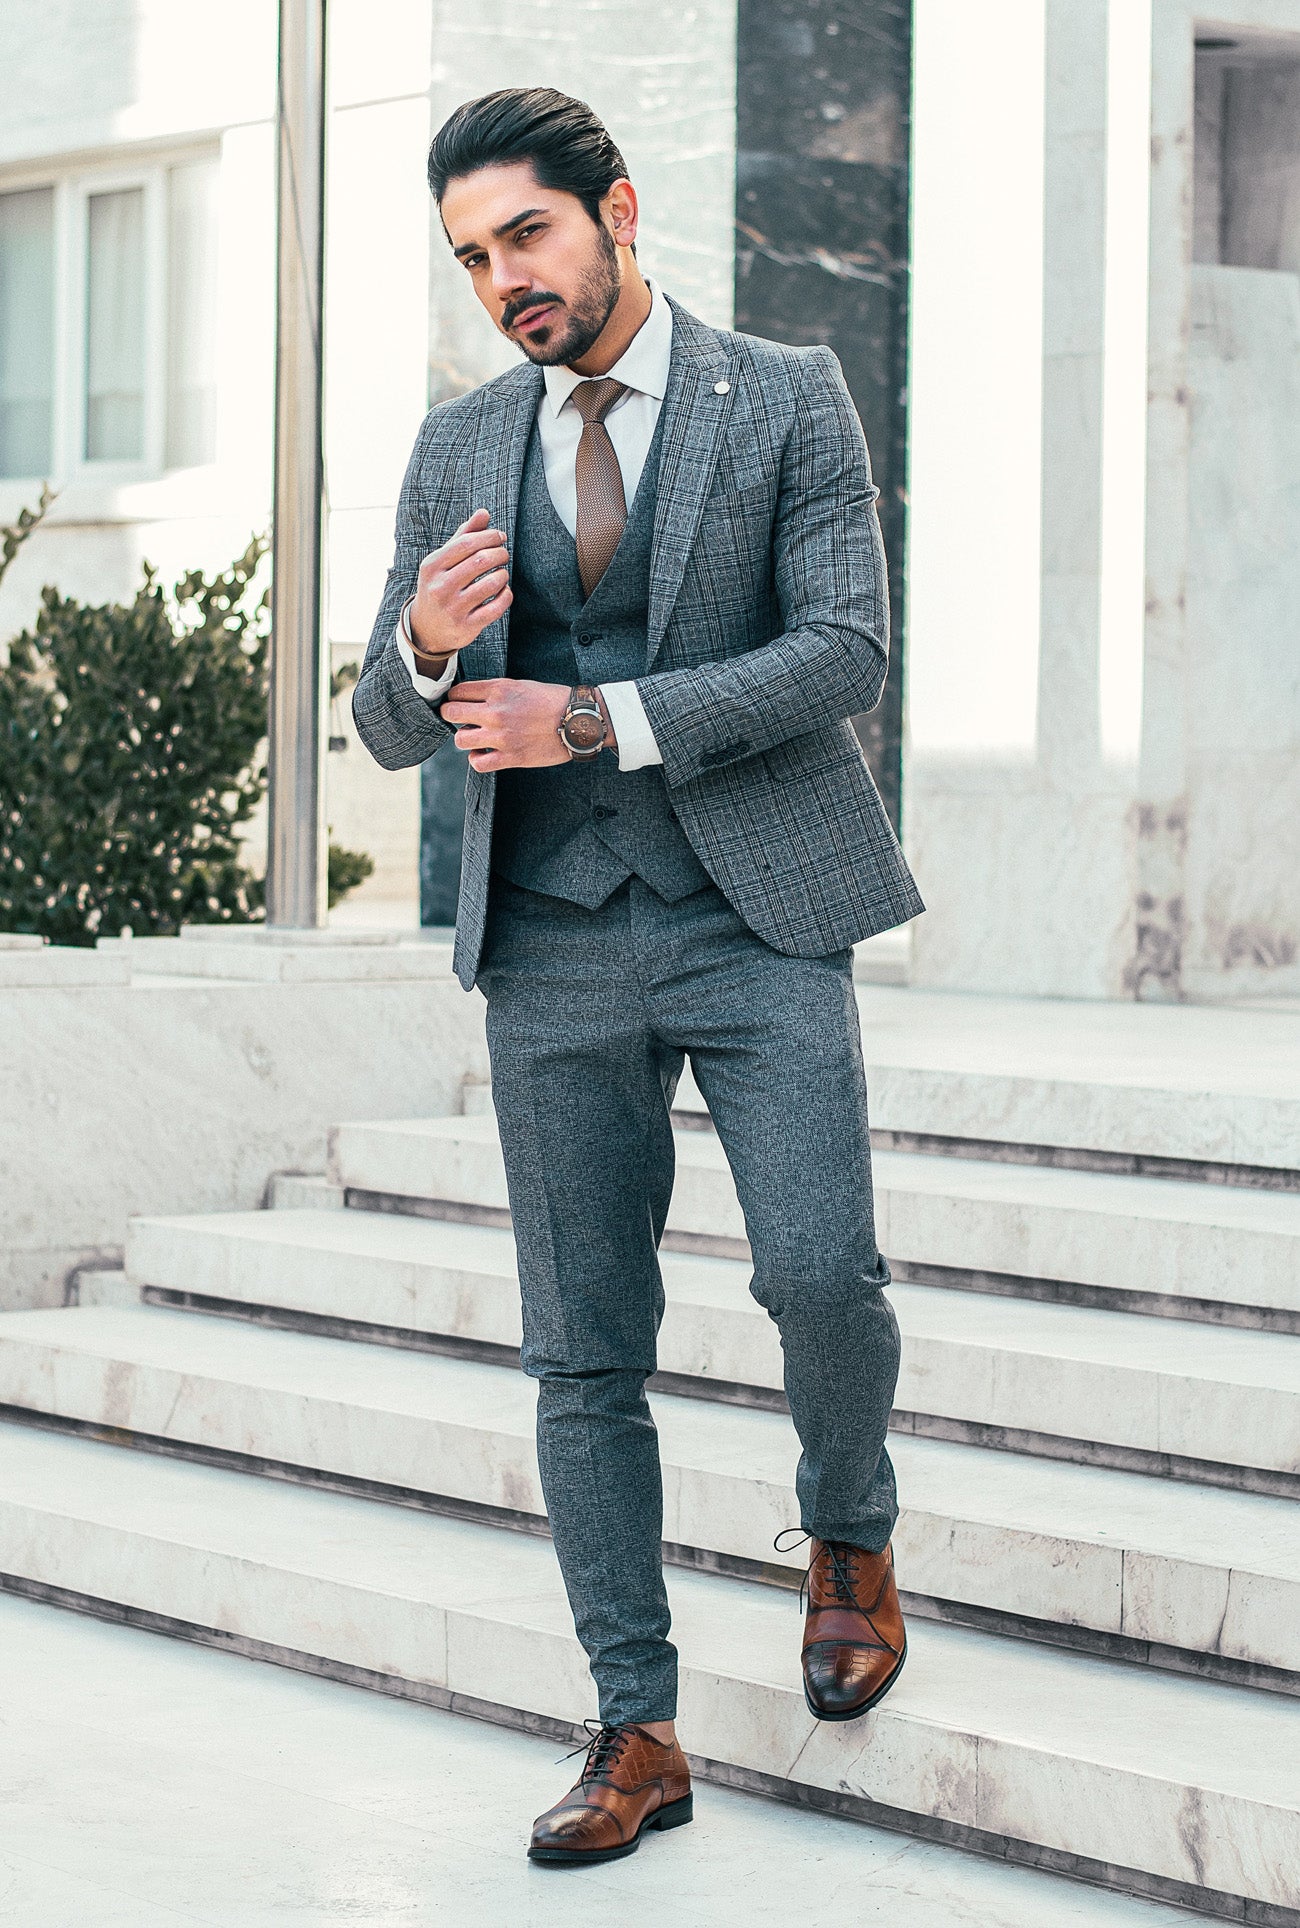 How to Wear A Grey Suit With Brown Shoes - Oliver Wicks